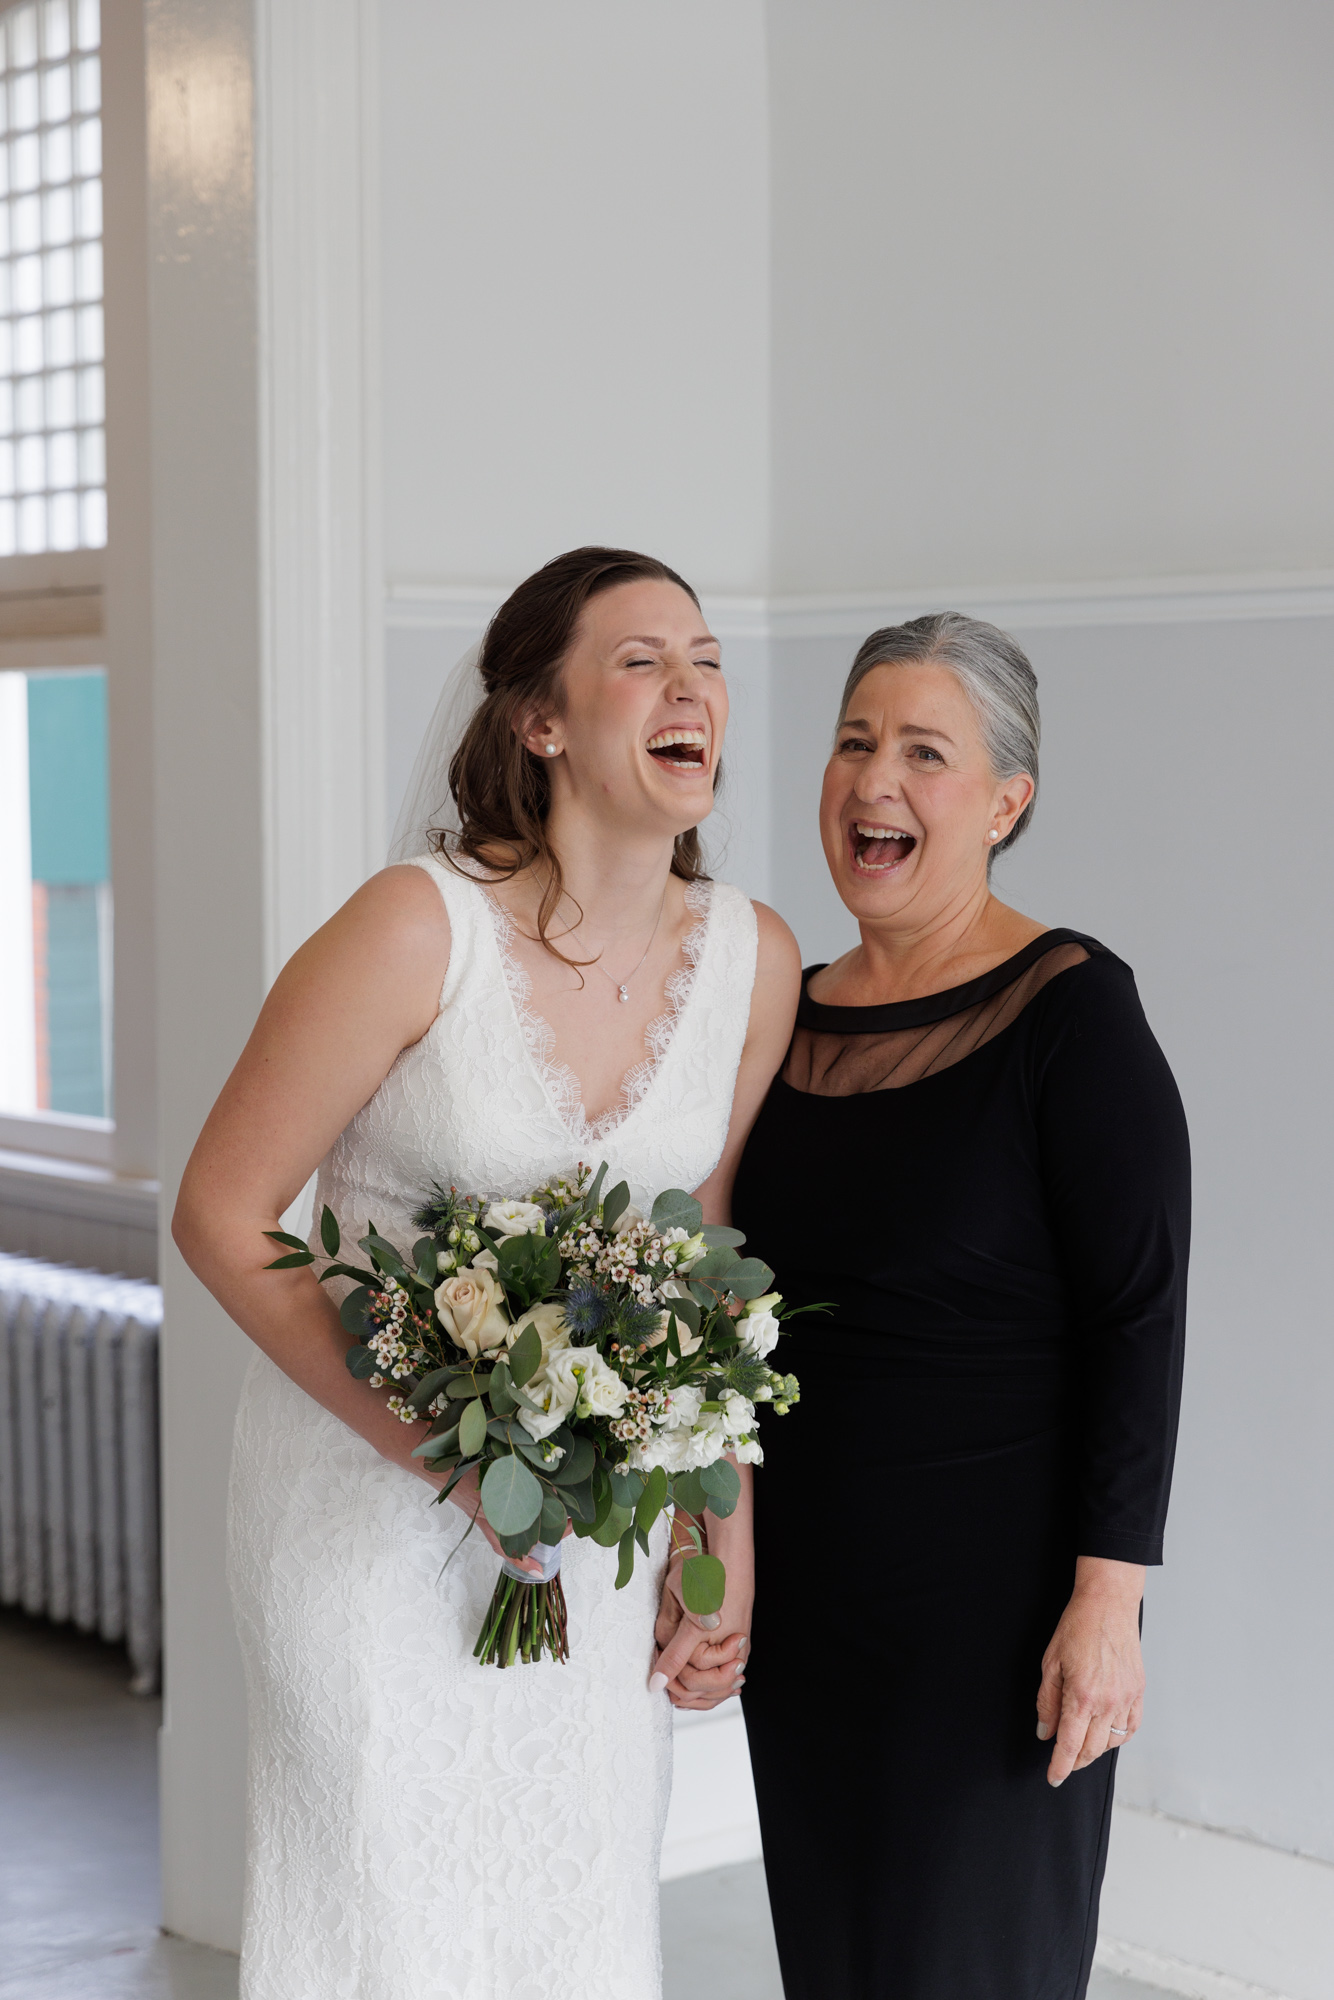 Elegant mother of the bride and bride laugh during a portrait session at a wedding at Old City Hall in Bordentown, NJ